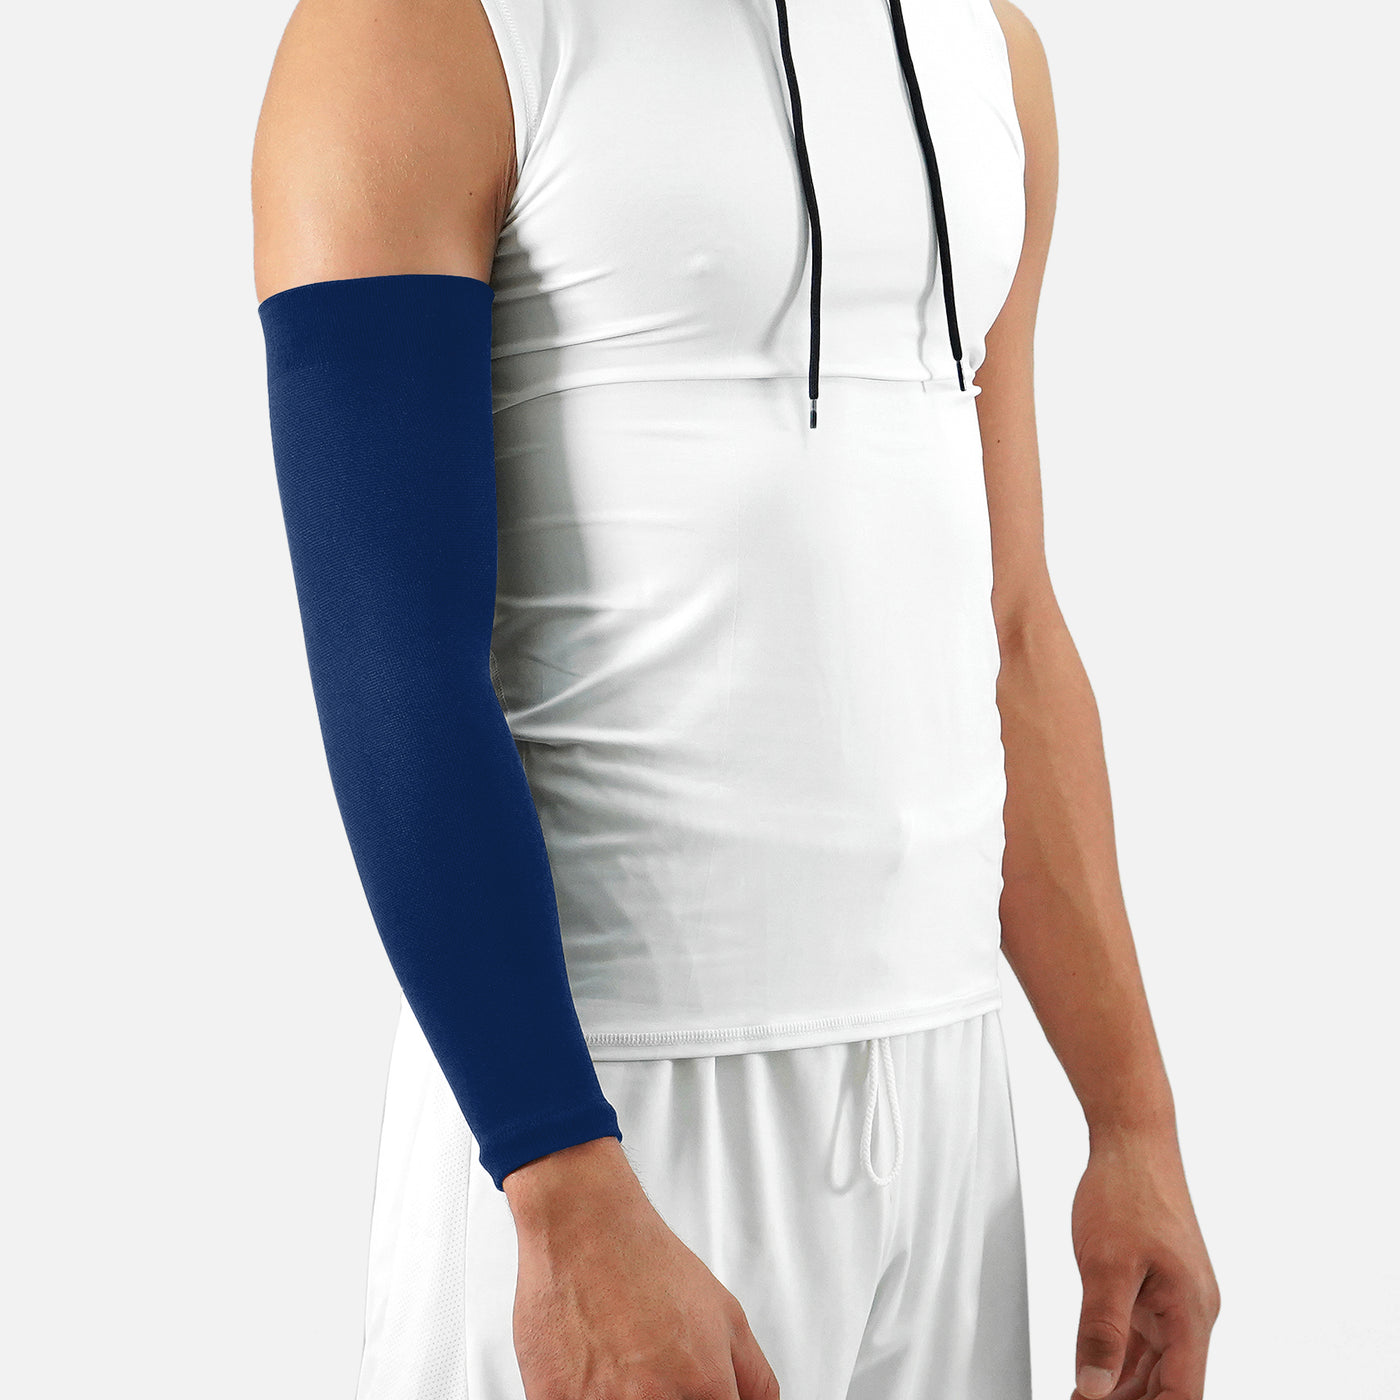 Hue Navy Blue One Size Fits All Arm Sleeve